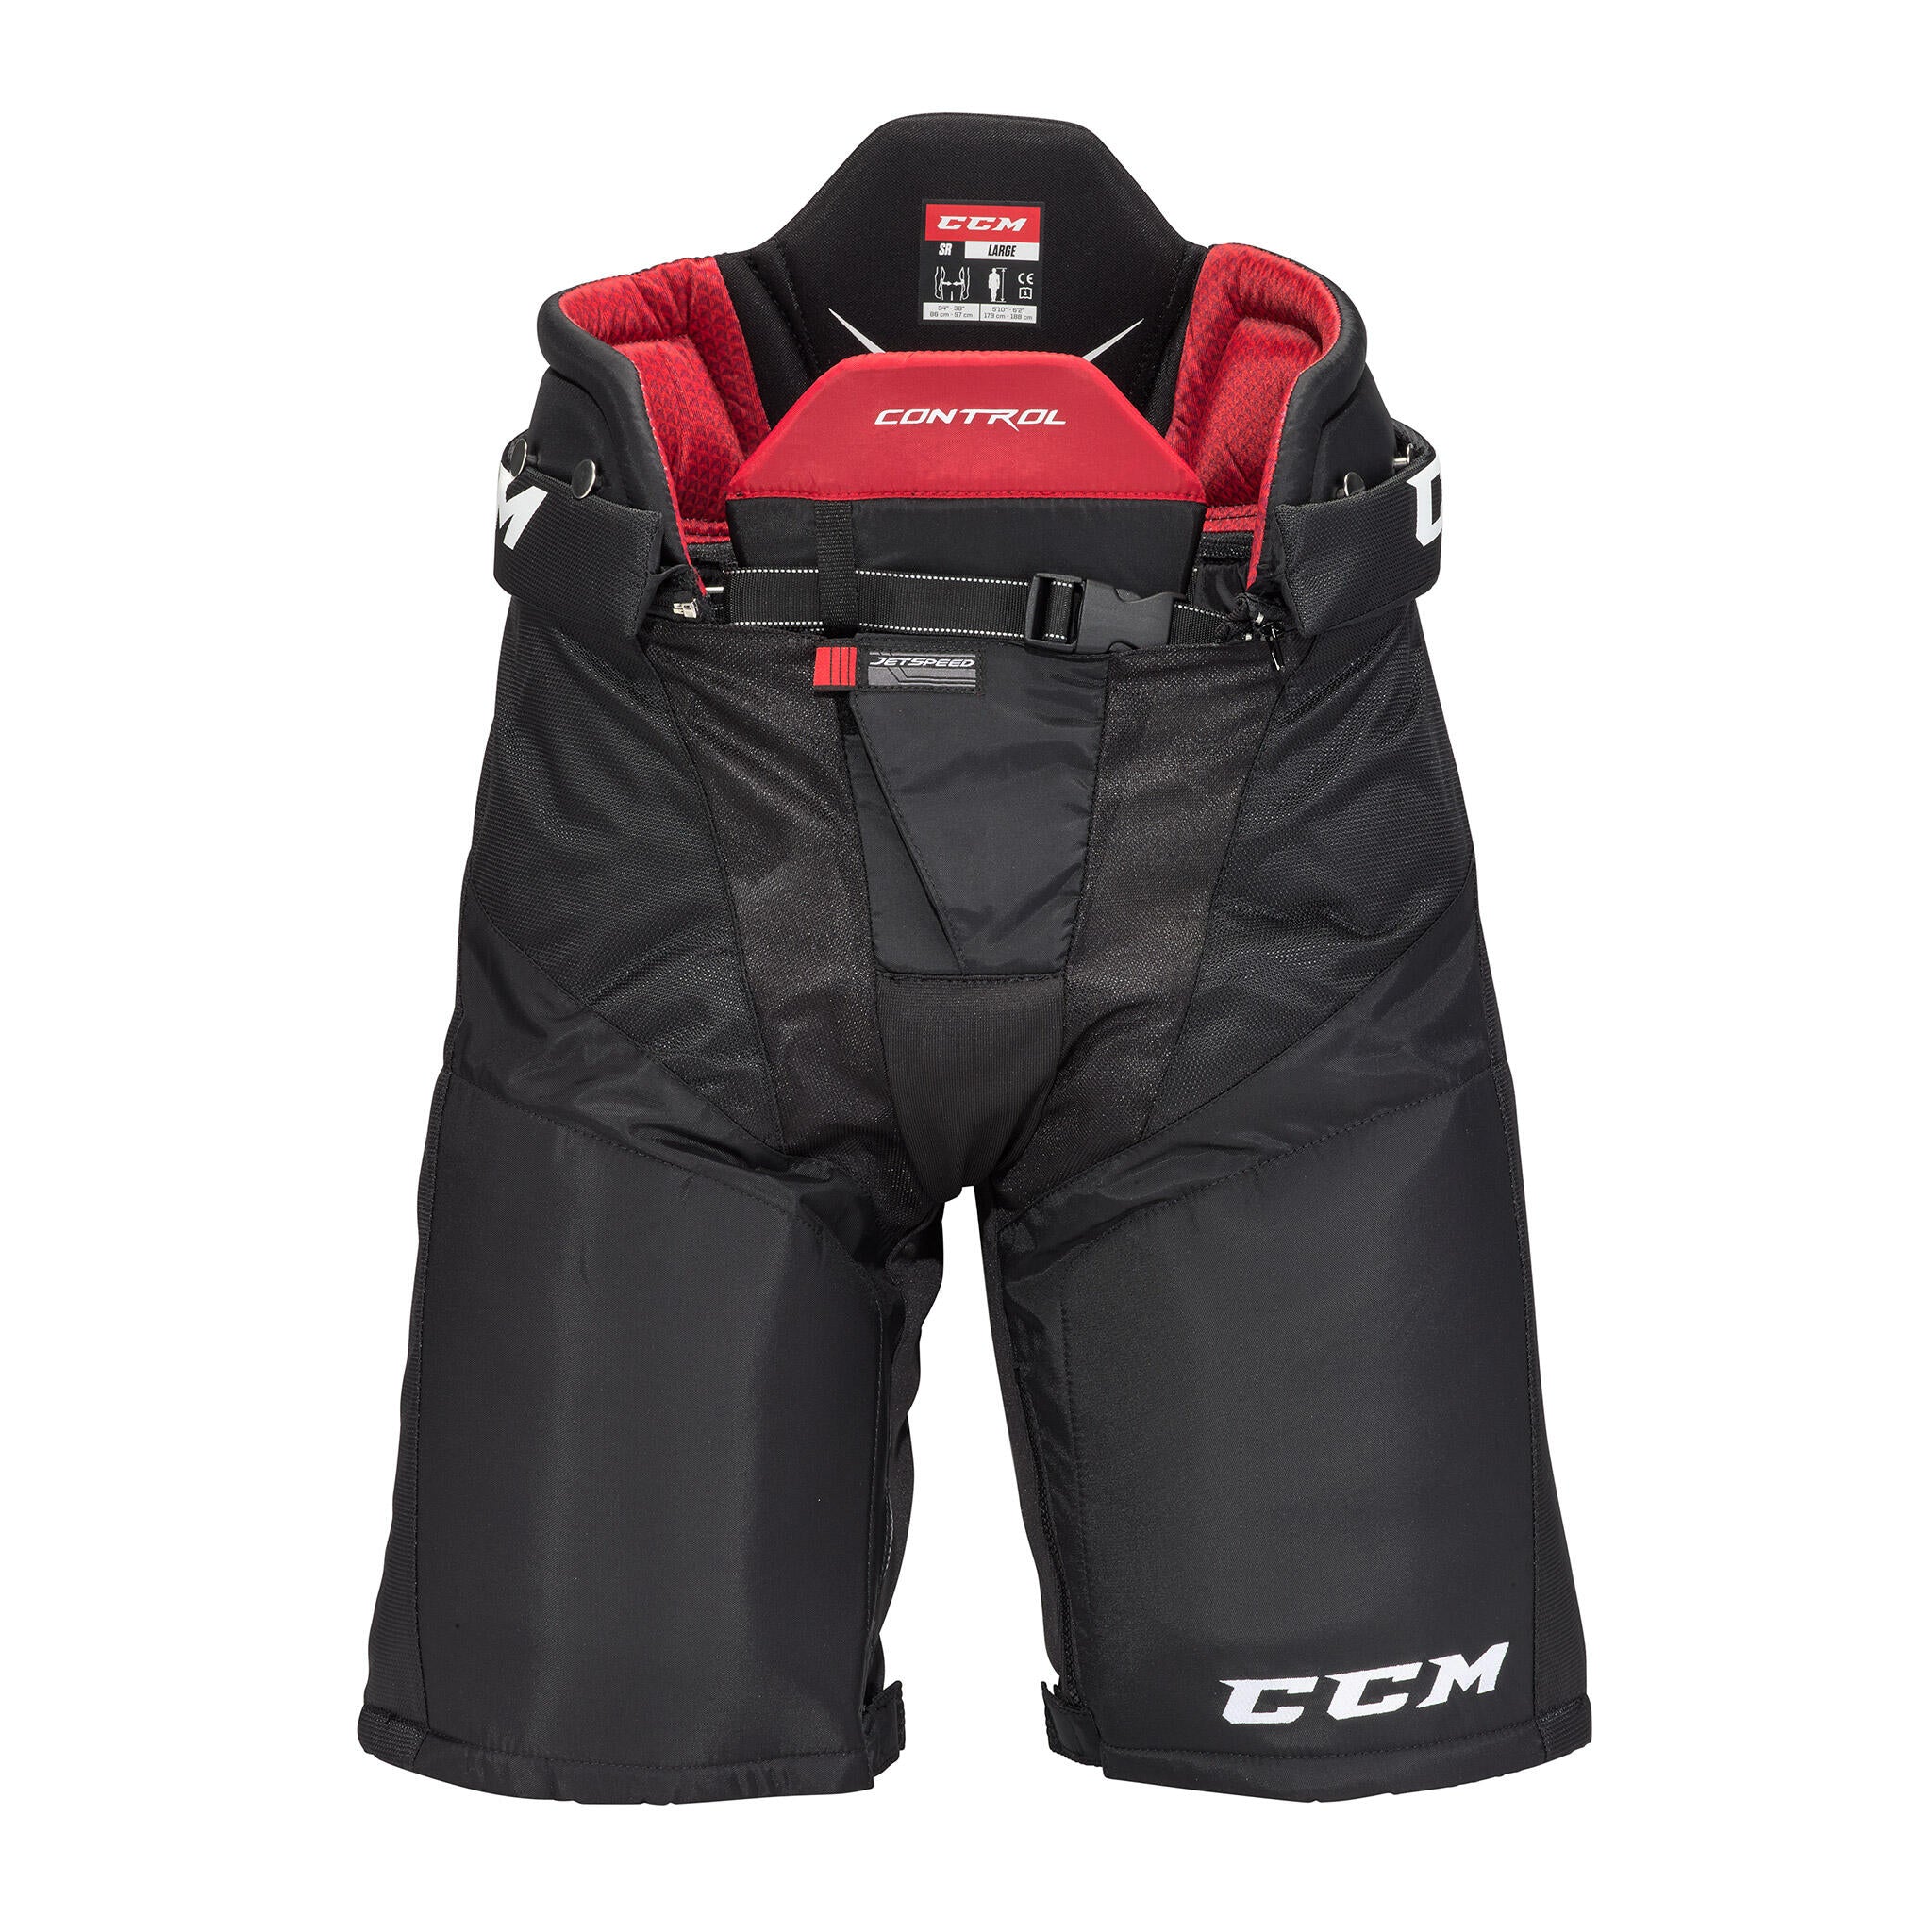 CCM JetSpeed Control Junior Hockey Pants - Source Exclusive, Source for  Sports